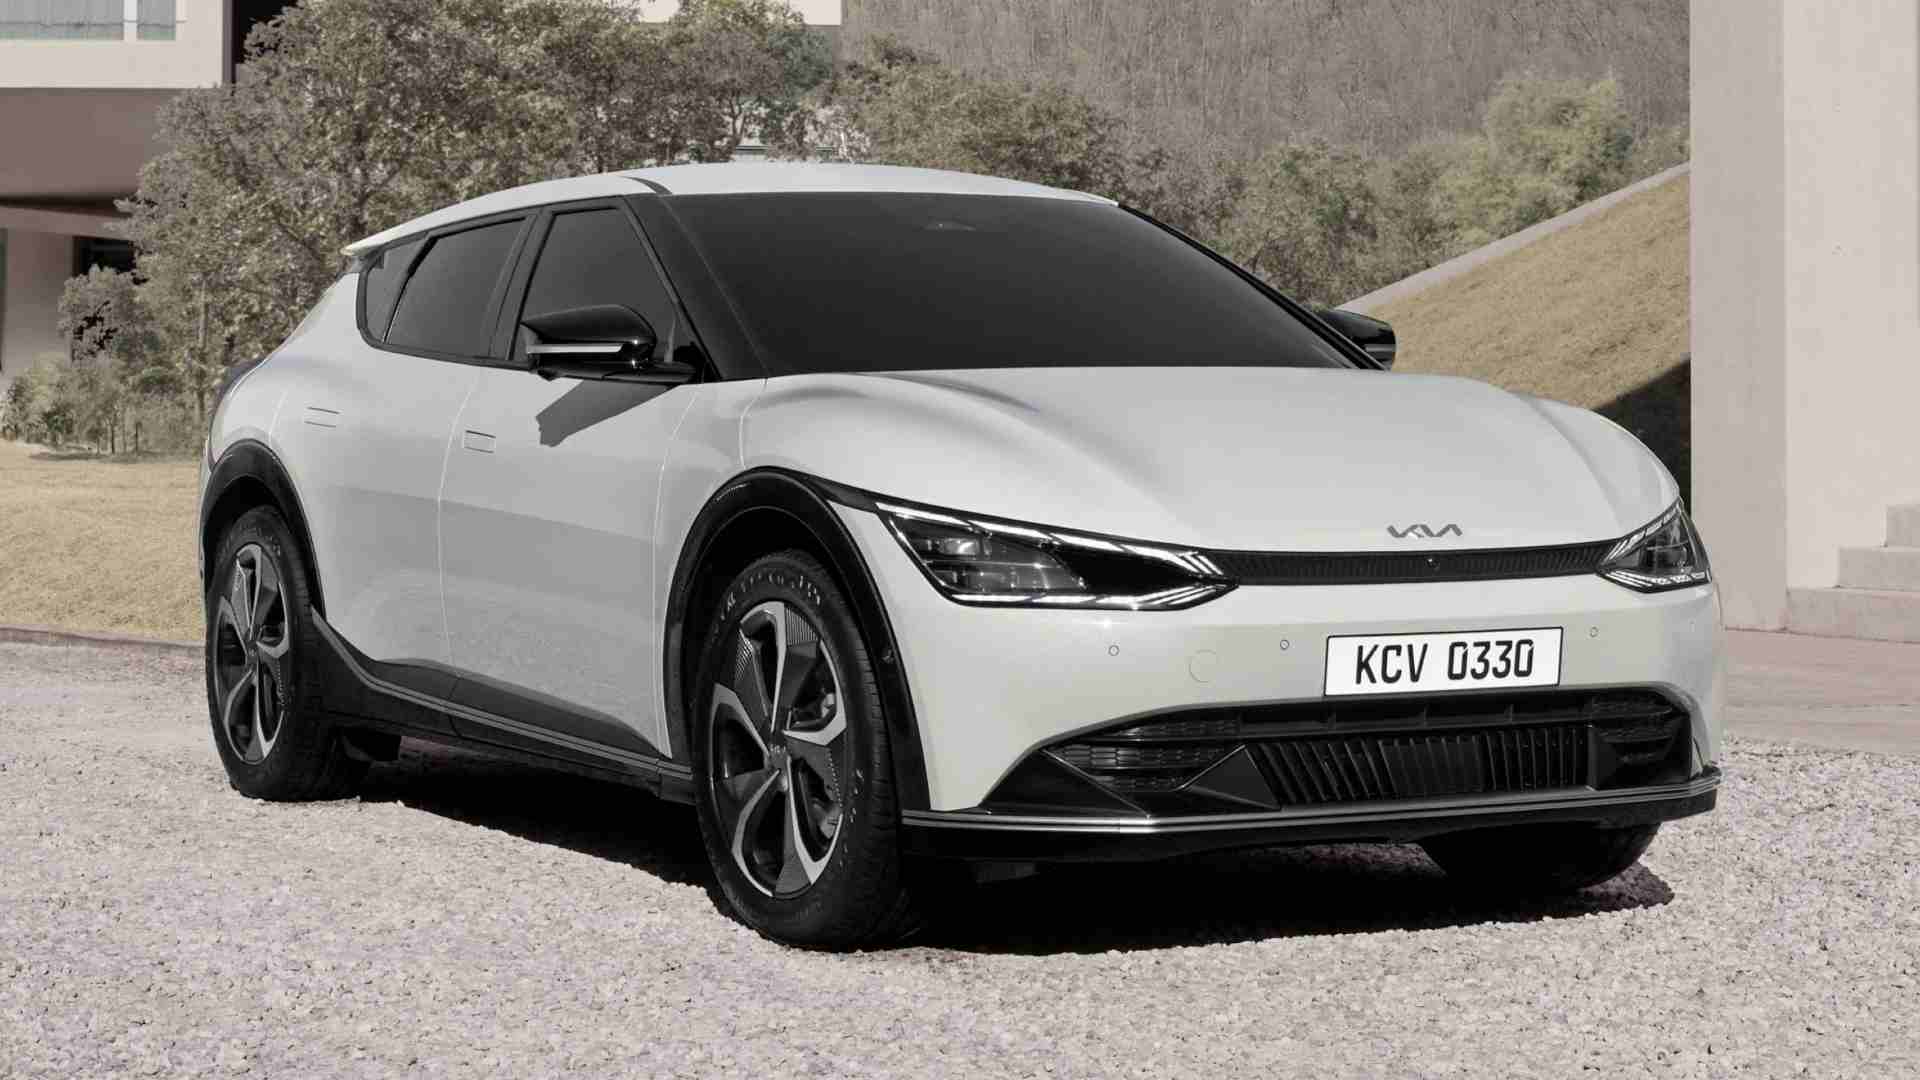 https://images.firstpost.com/wp-content/uploads/2021/03/kia-ev6-revealed-ahead-of-world-premiere-in-march.jpg